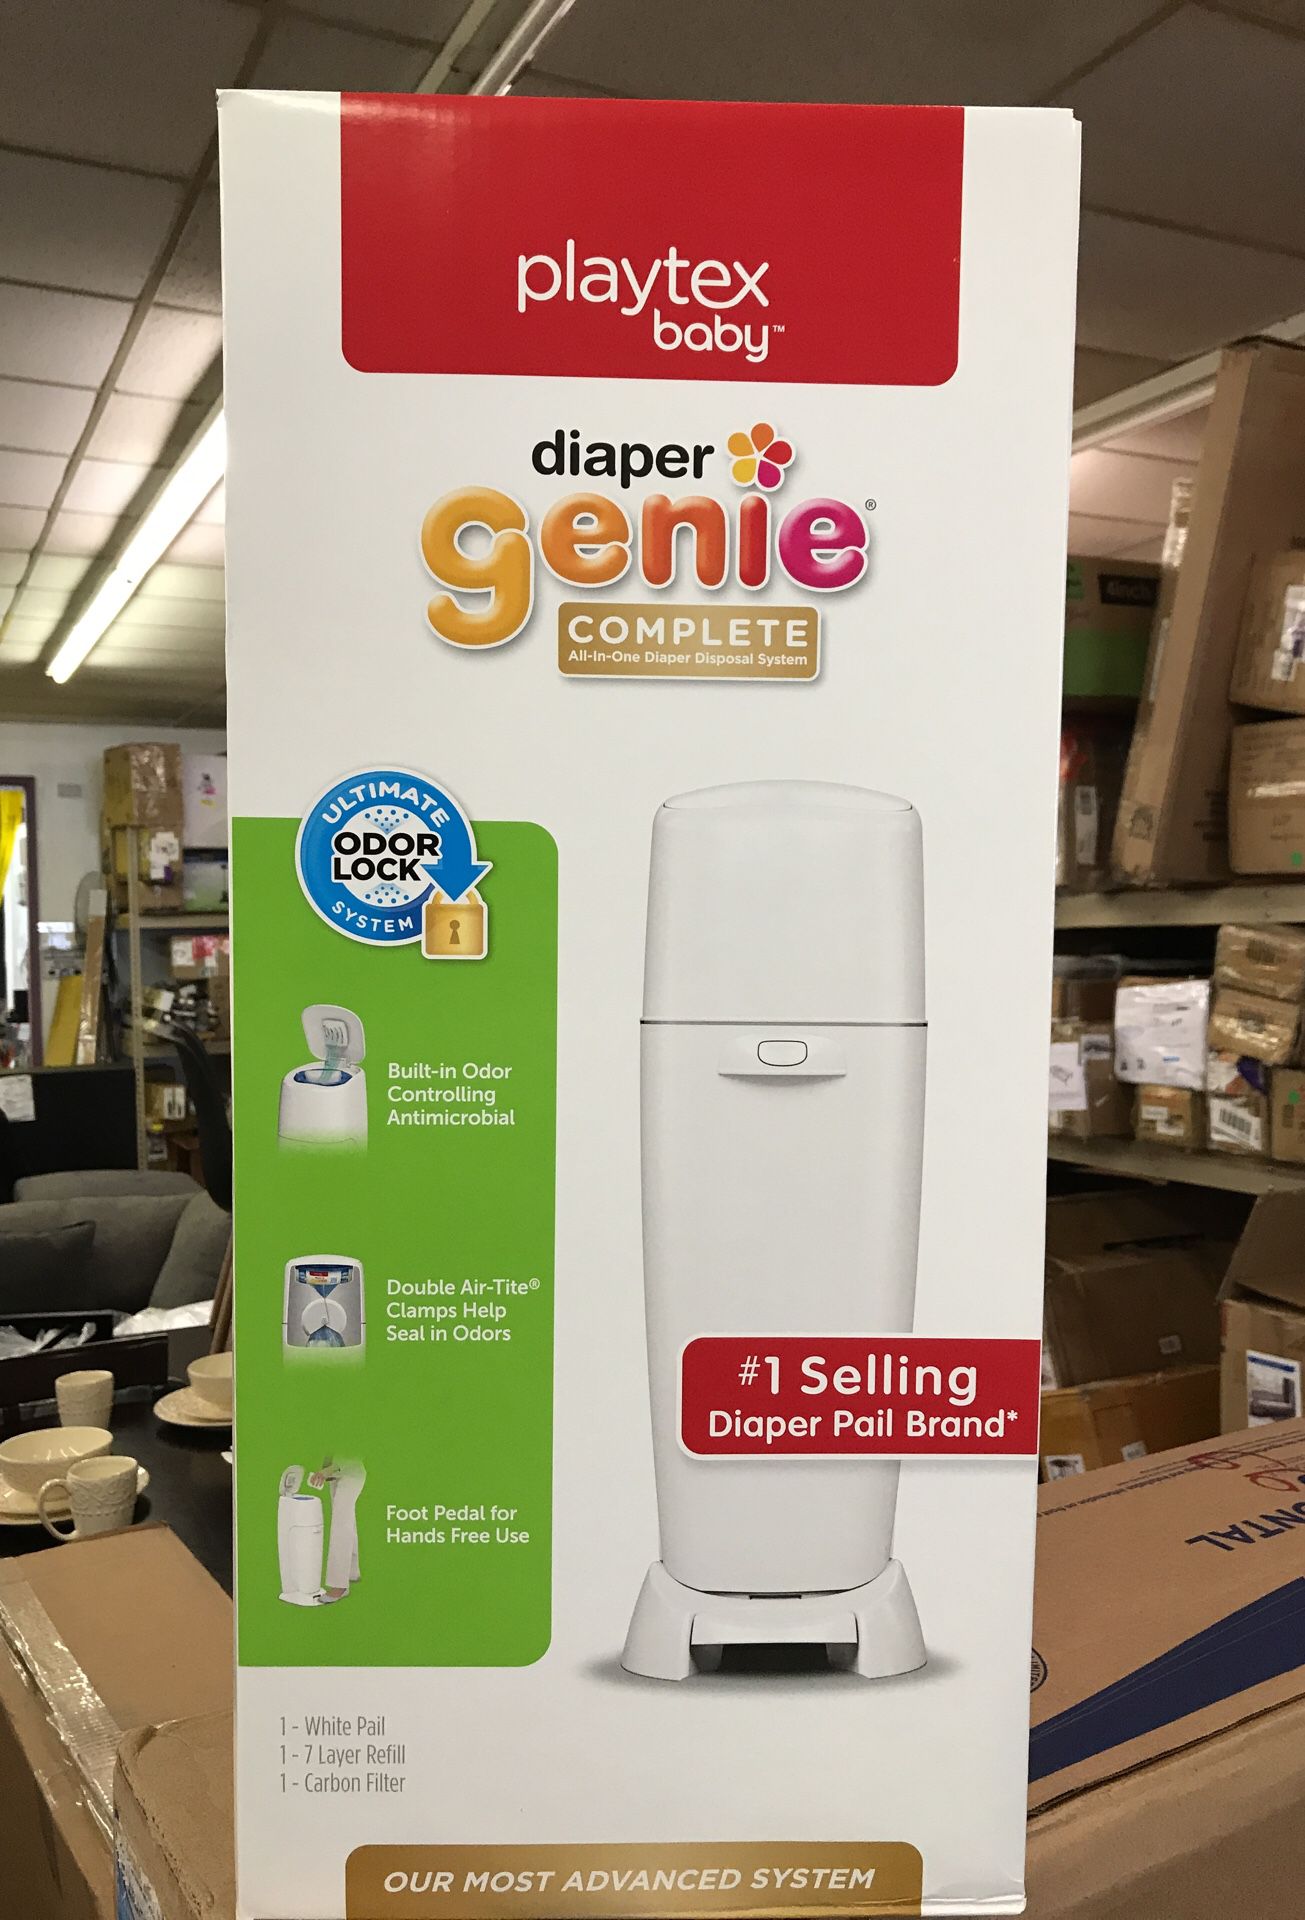 Brand New Diaper Genie Complete All in One Diaper Disposal System